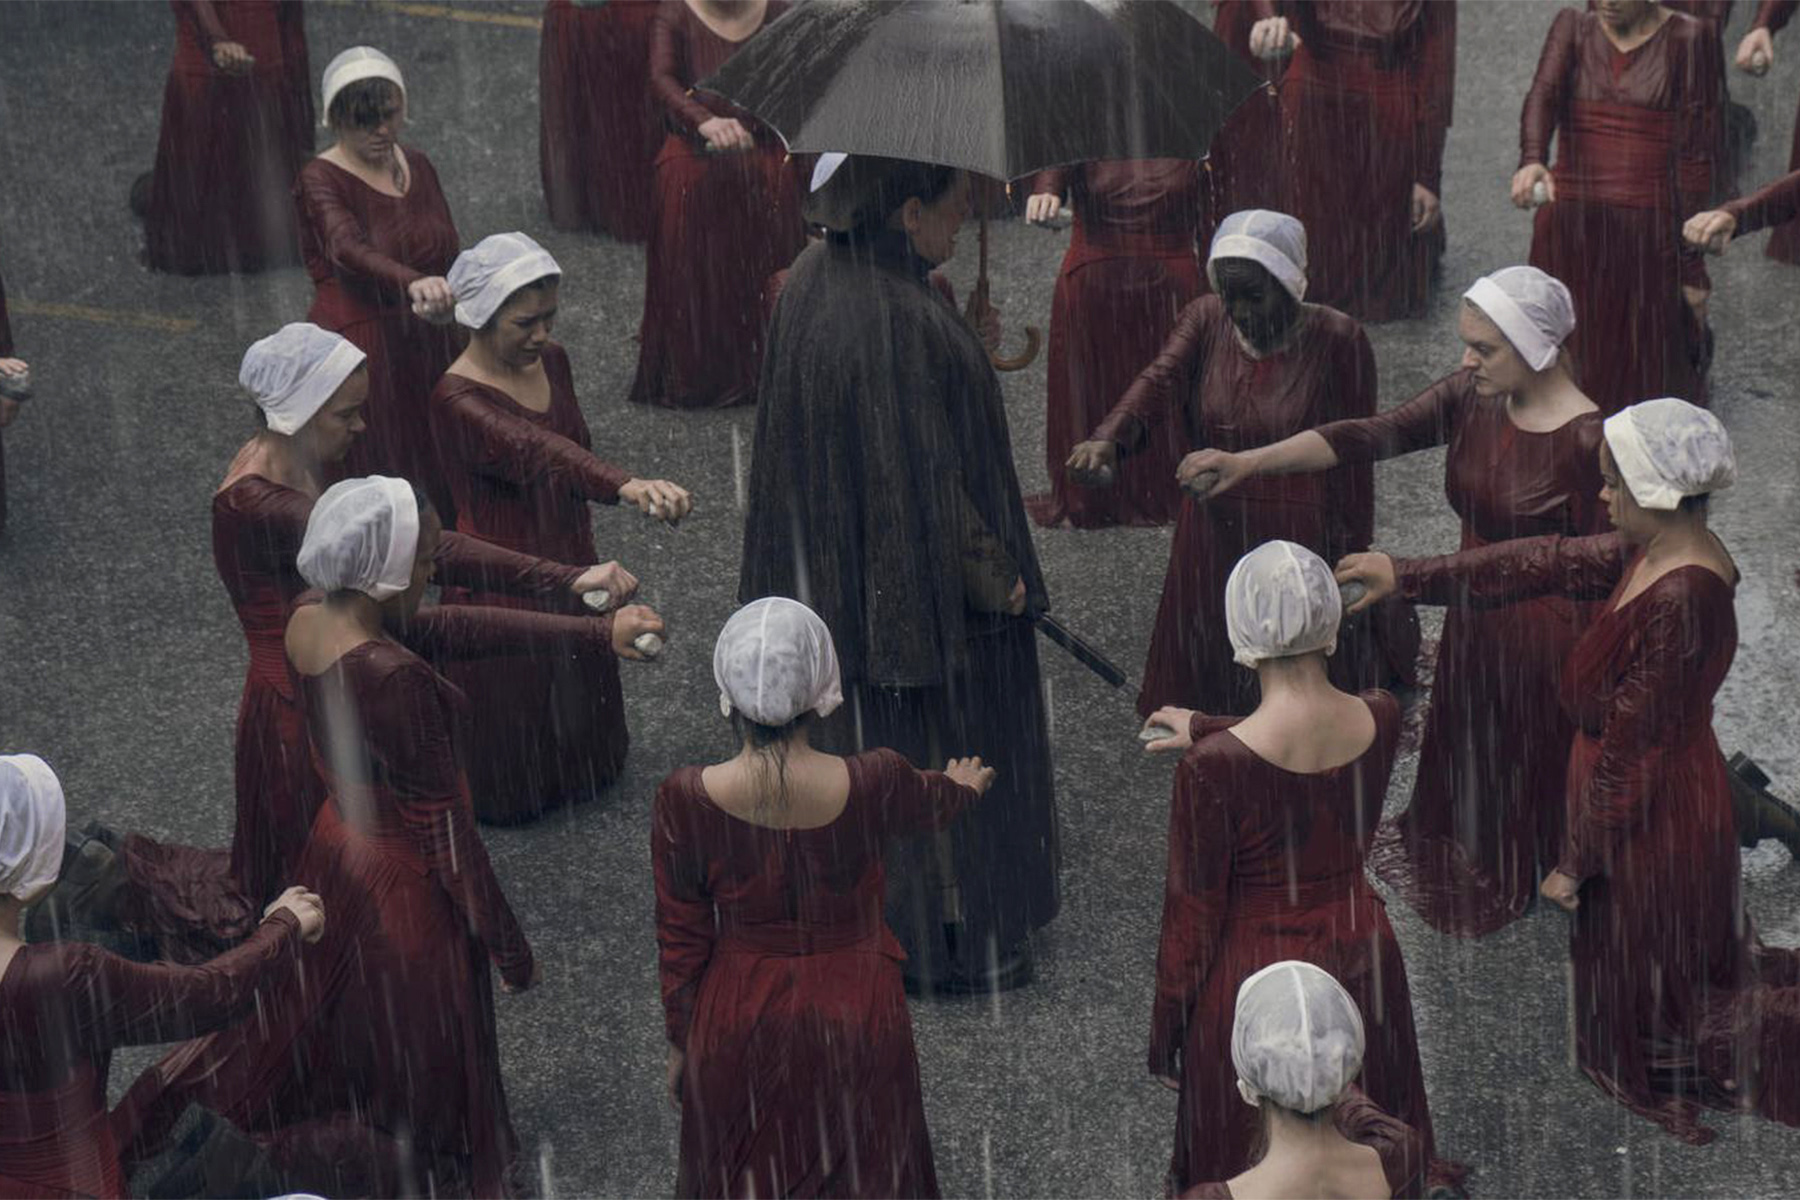 A still from the TV adaptation of The Handmaid's Tale by Margaret Atwood. Photo: Hulu